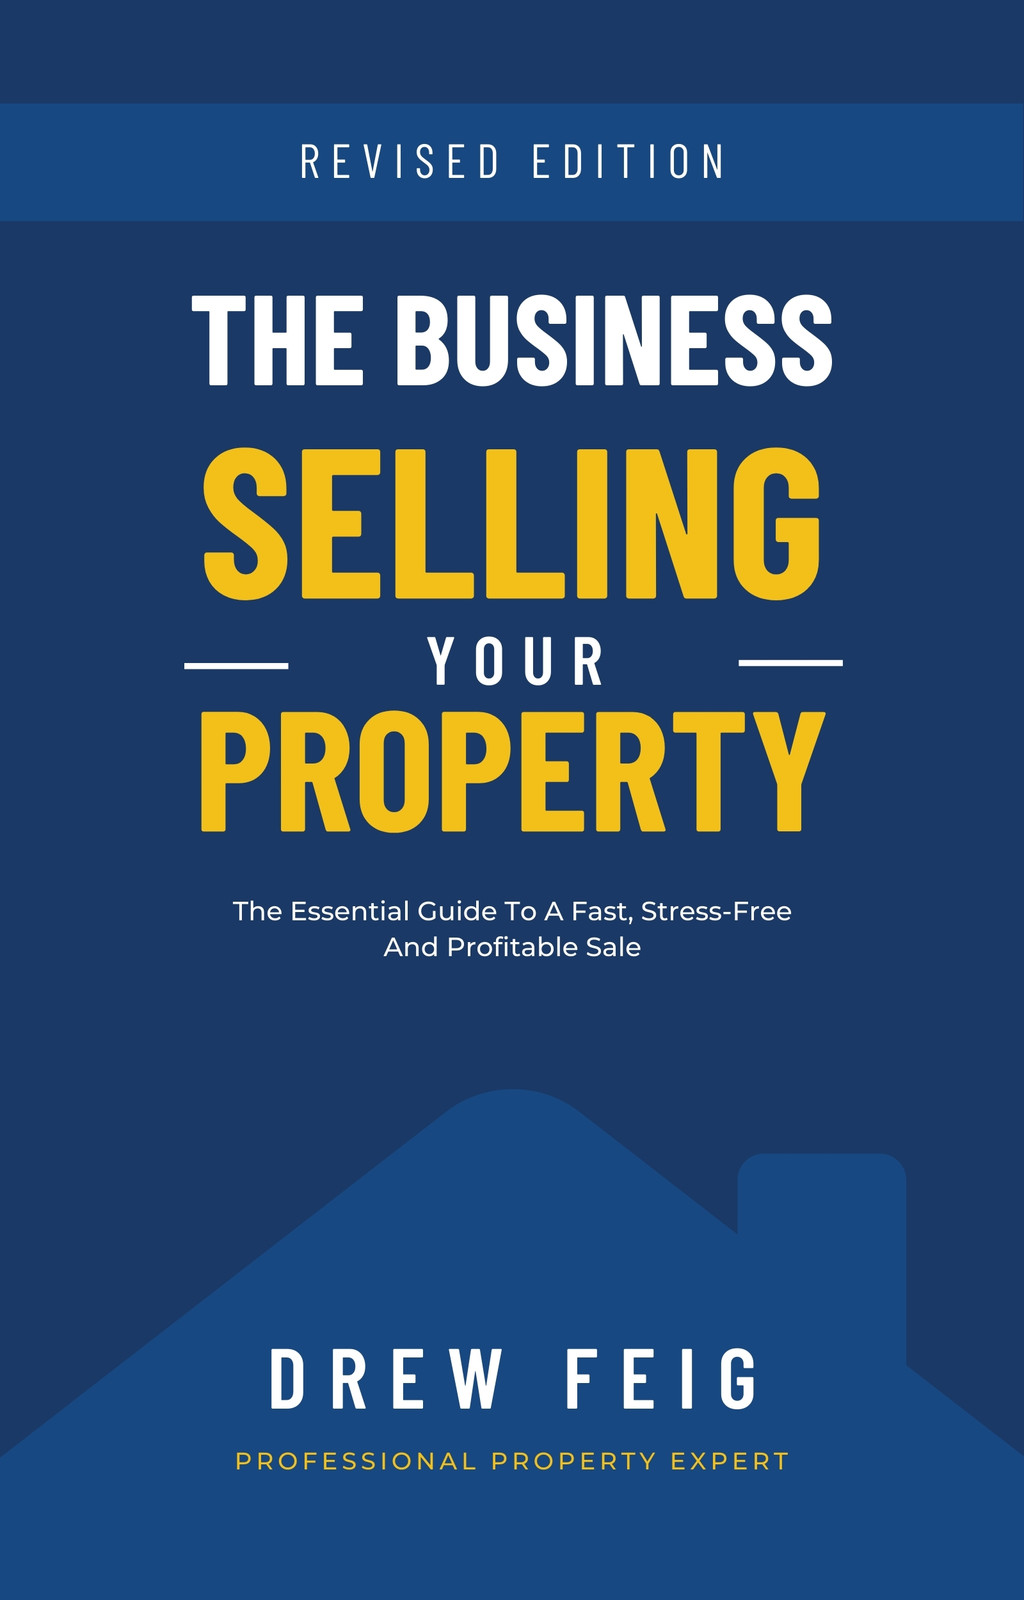 How to Sell Your Home: The Essential Guide to a Fast, Stress-Free